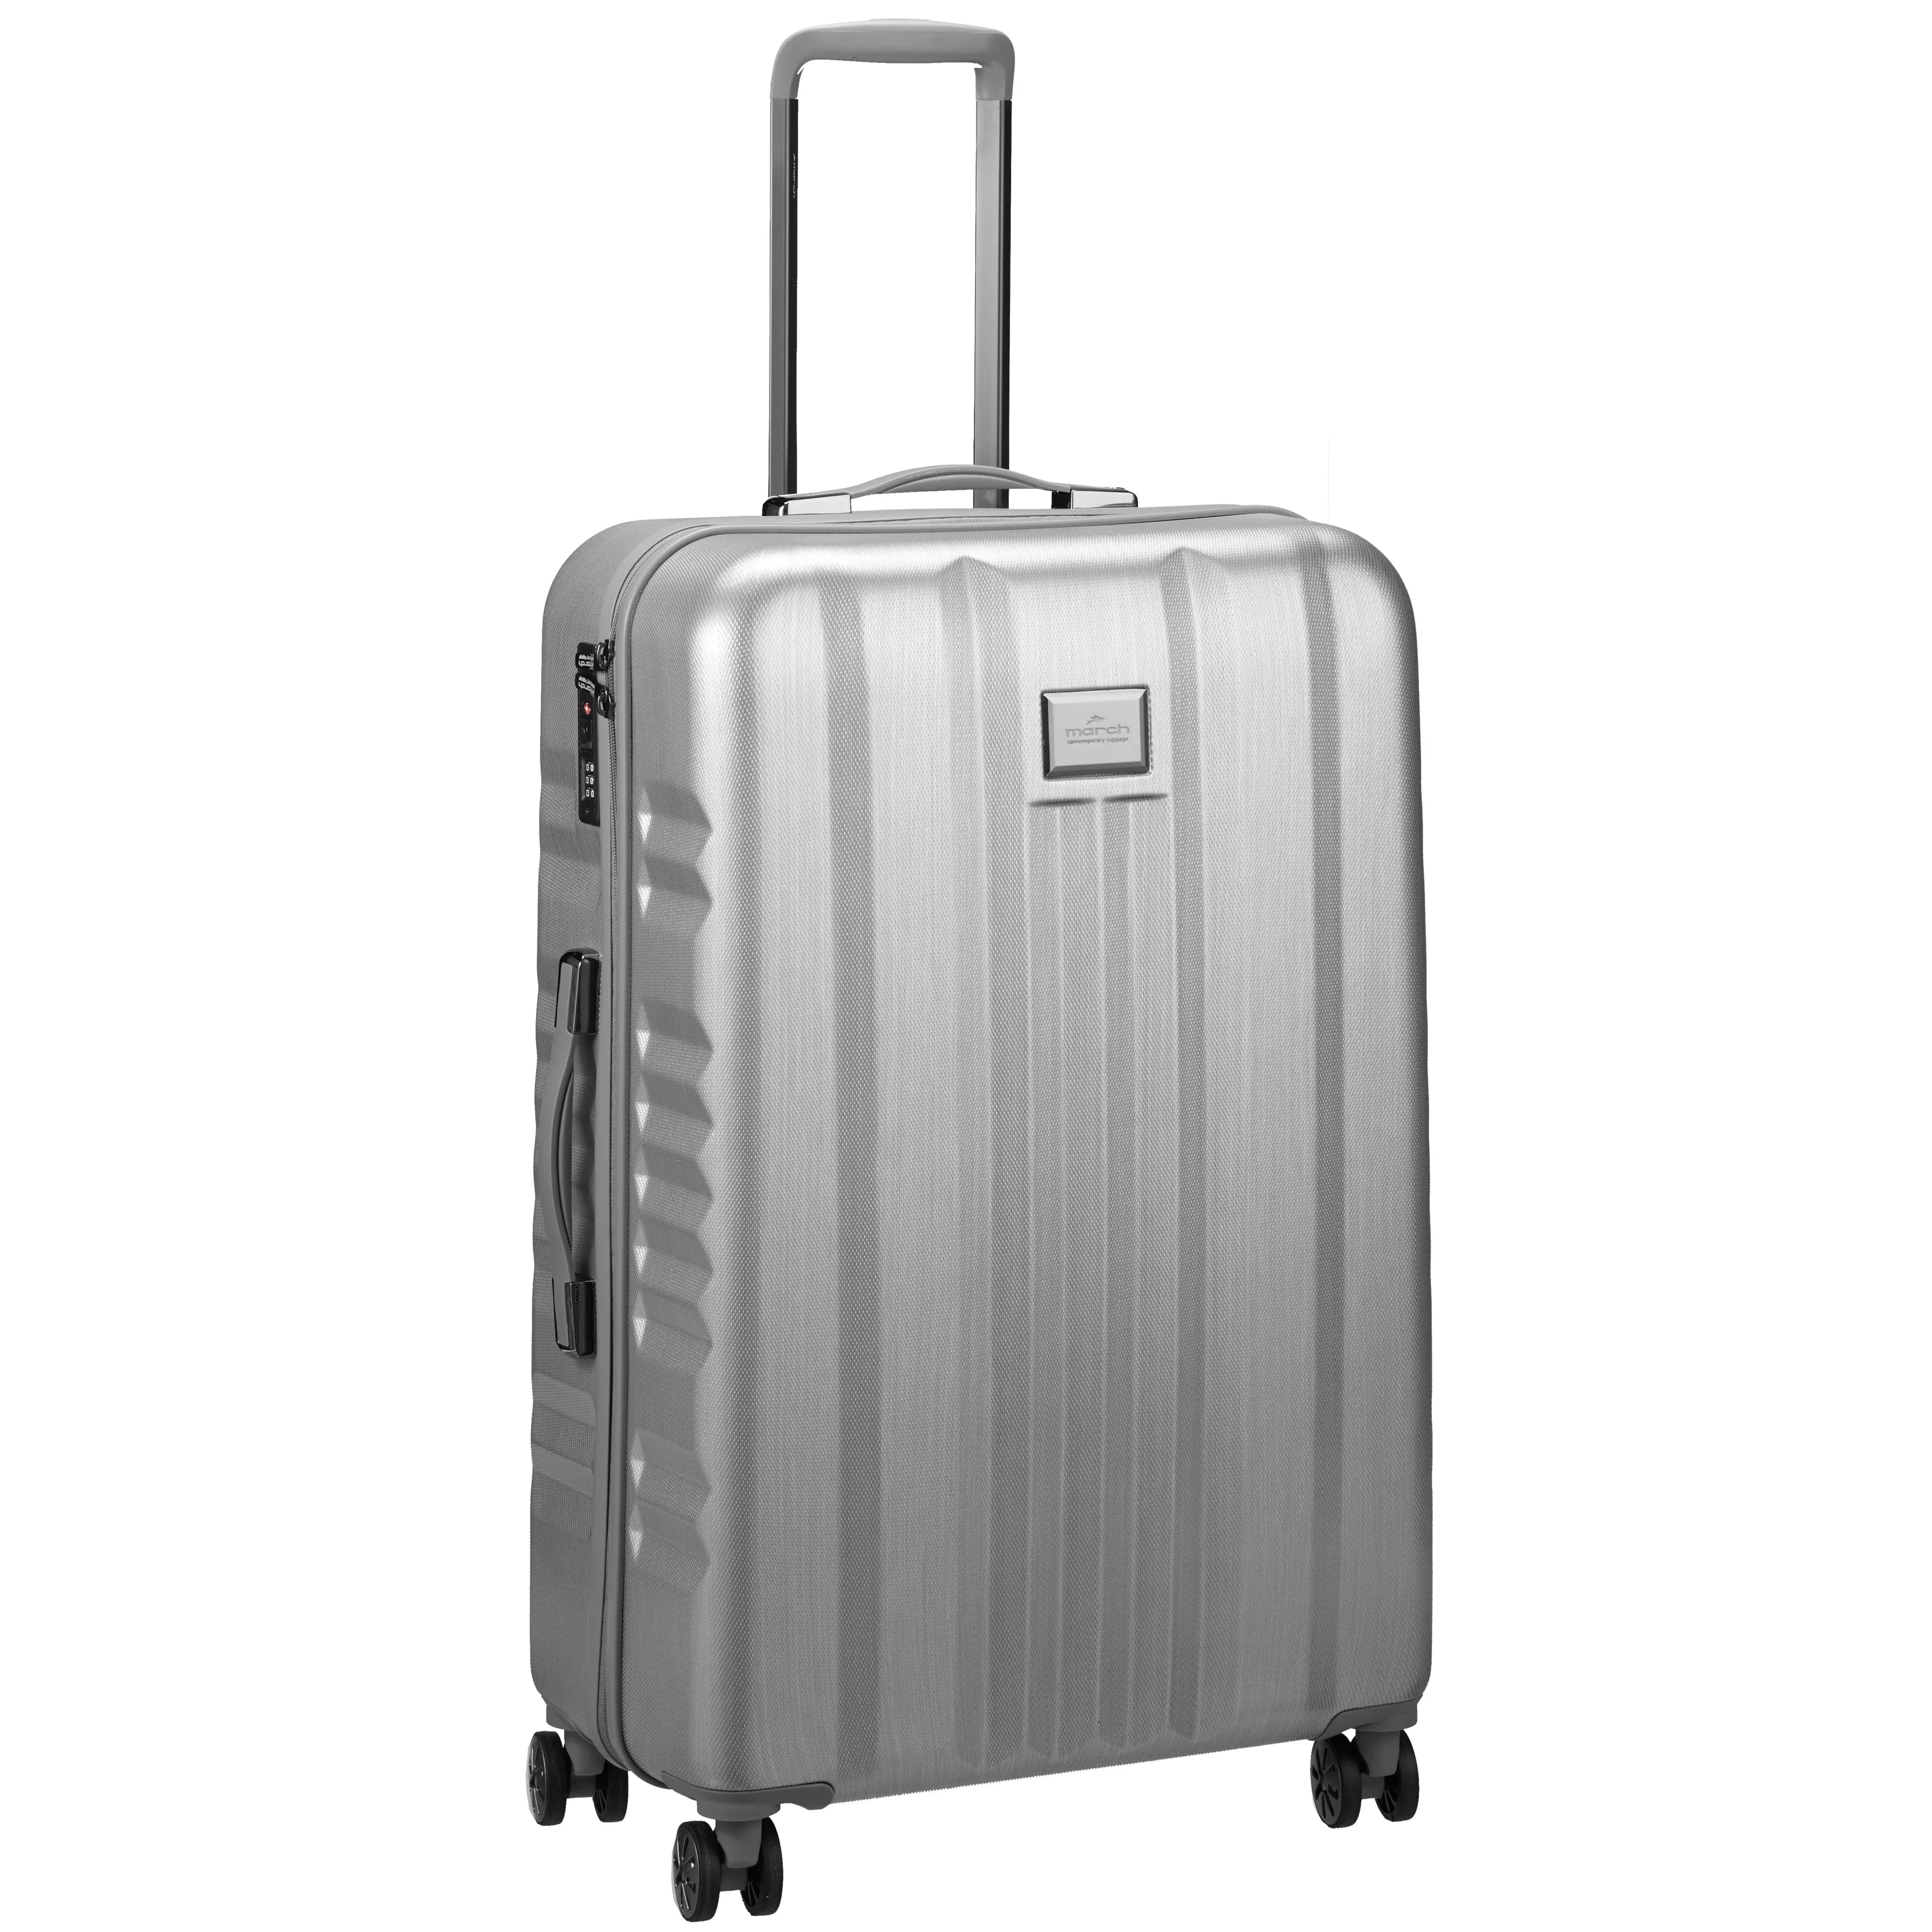 March 15 Trading Fly 4-wheel trolley 75 cm - silver brushed